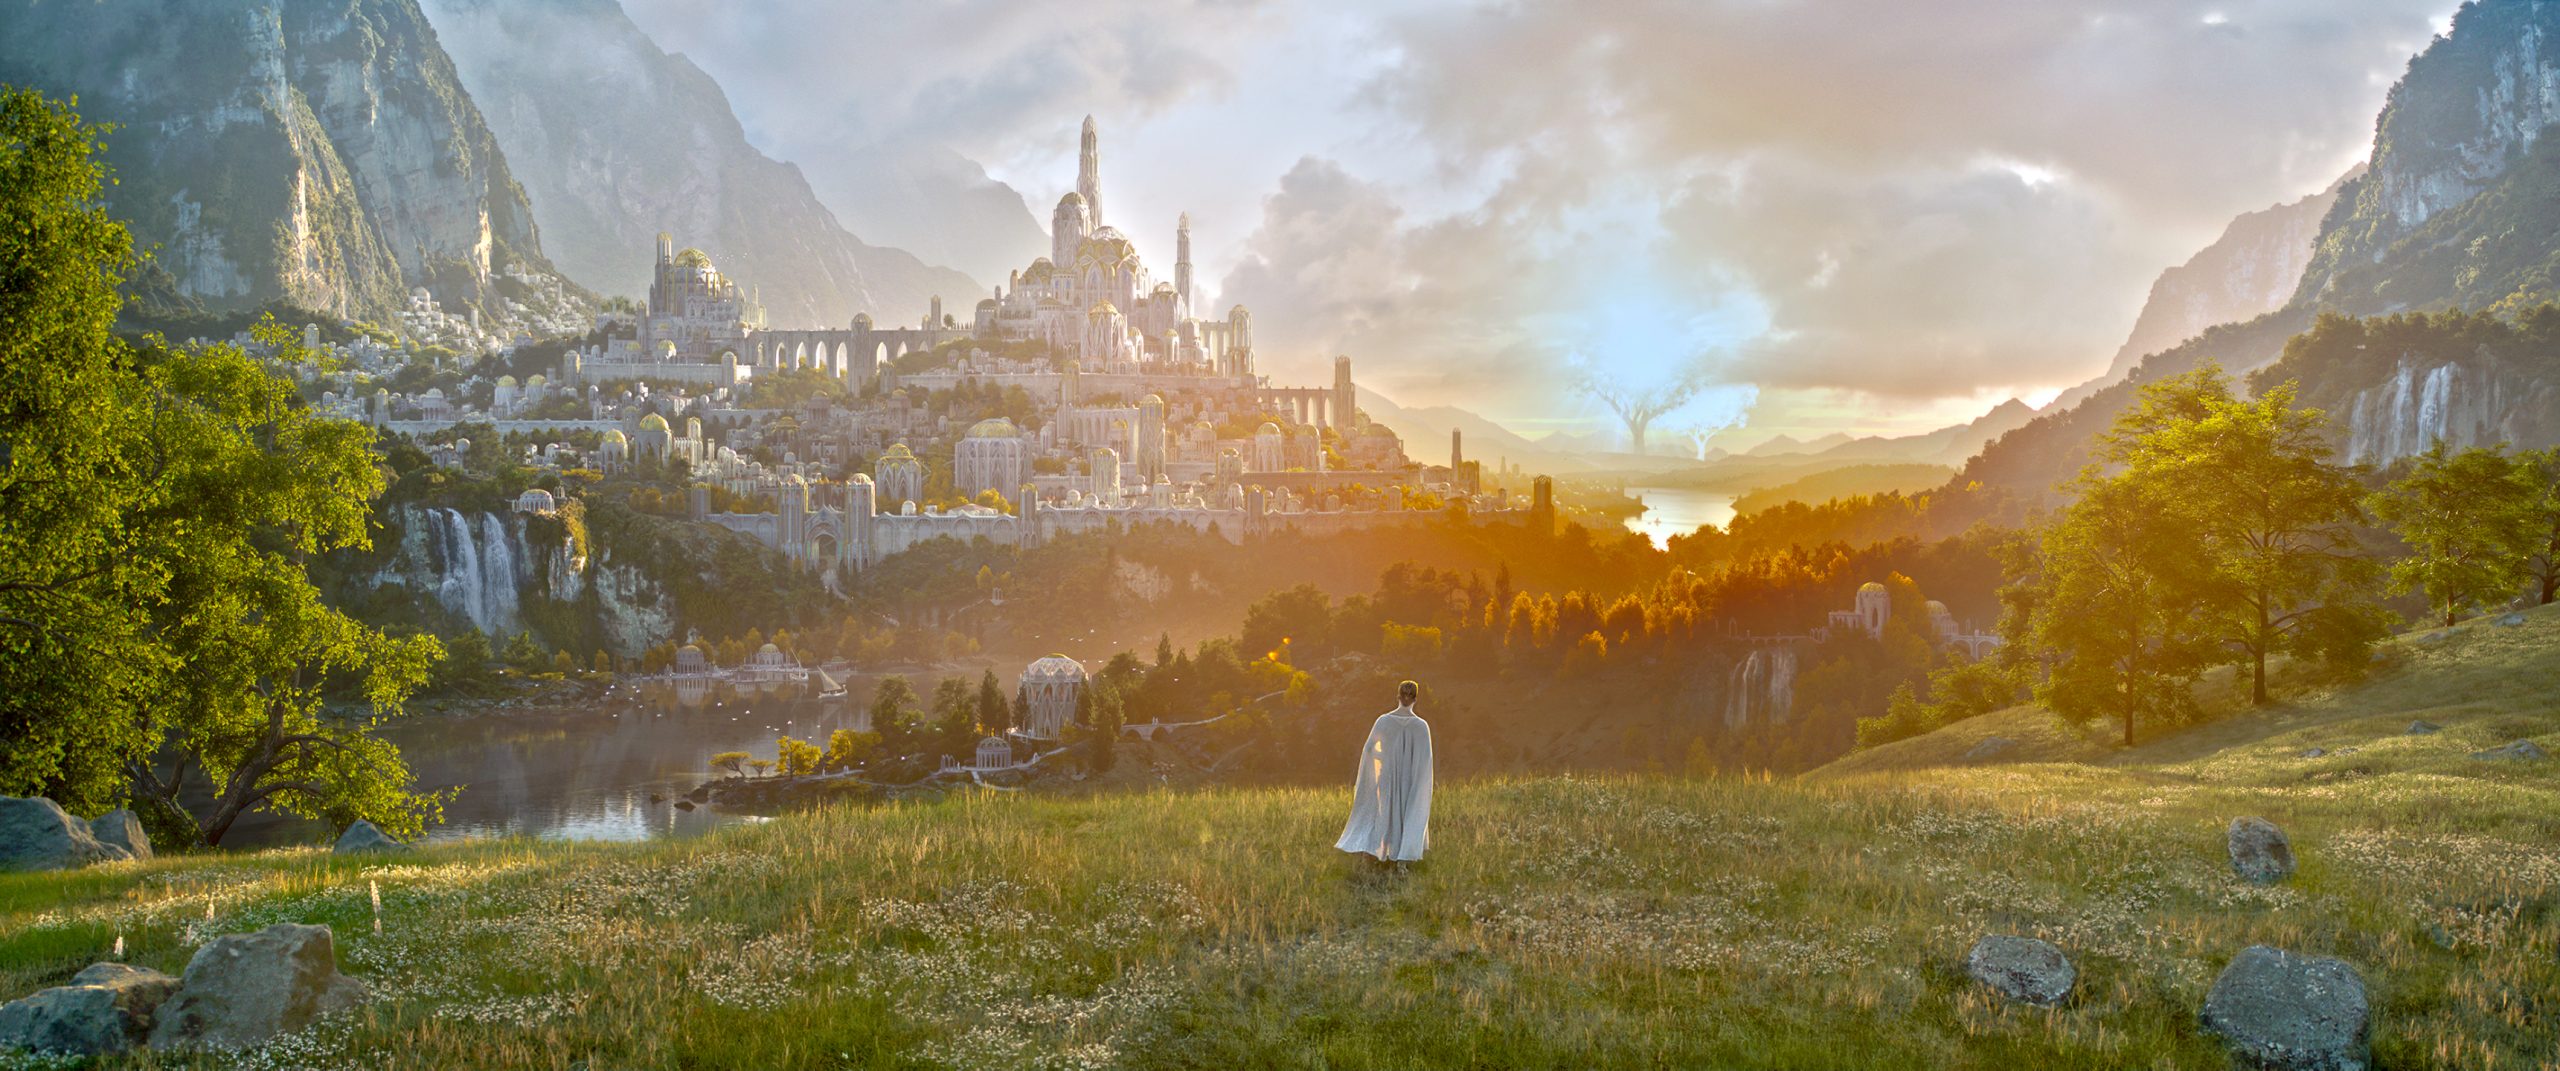 What is Valinor in Lord of the Rings The Rings of Power?